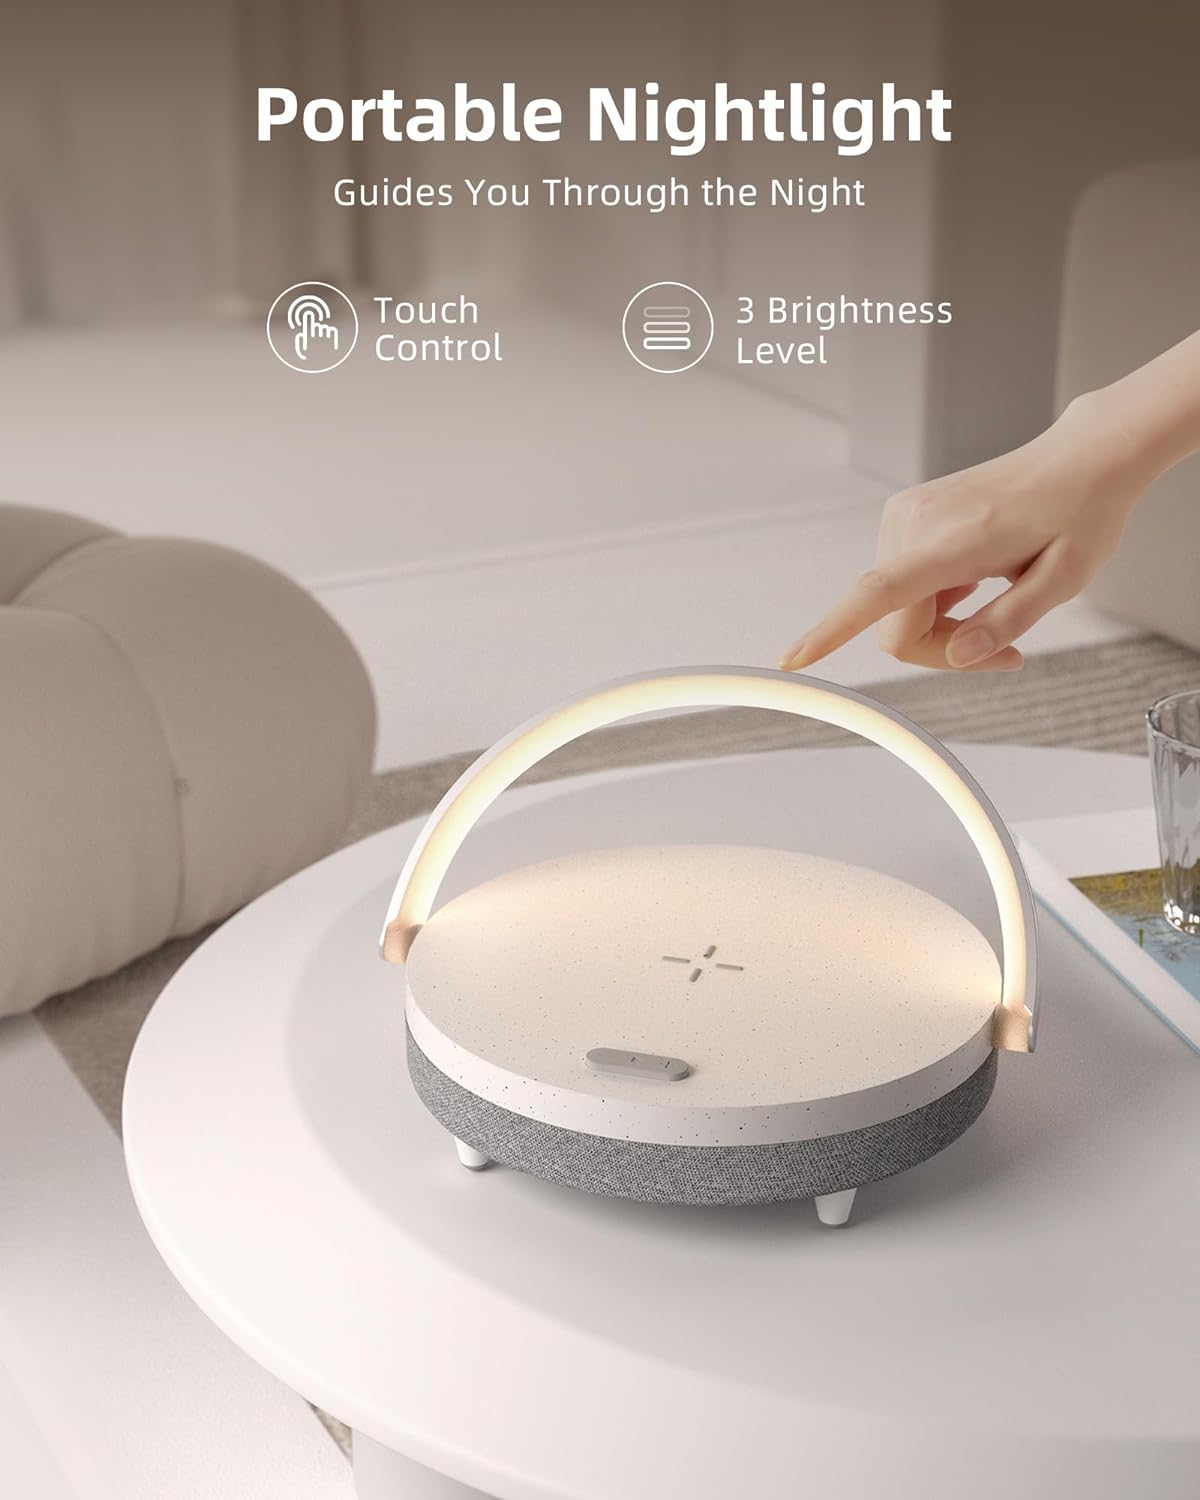 Bedside Lamp Wireless Charger LED Table Lamp